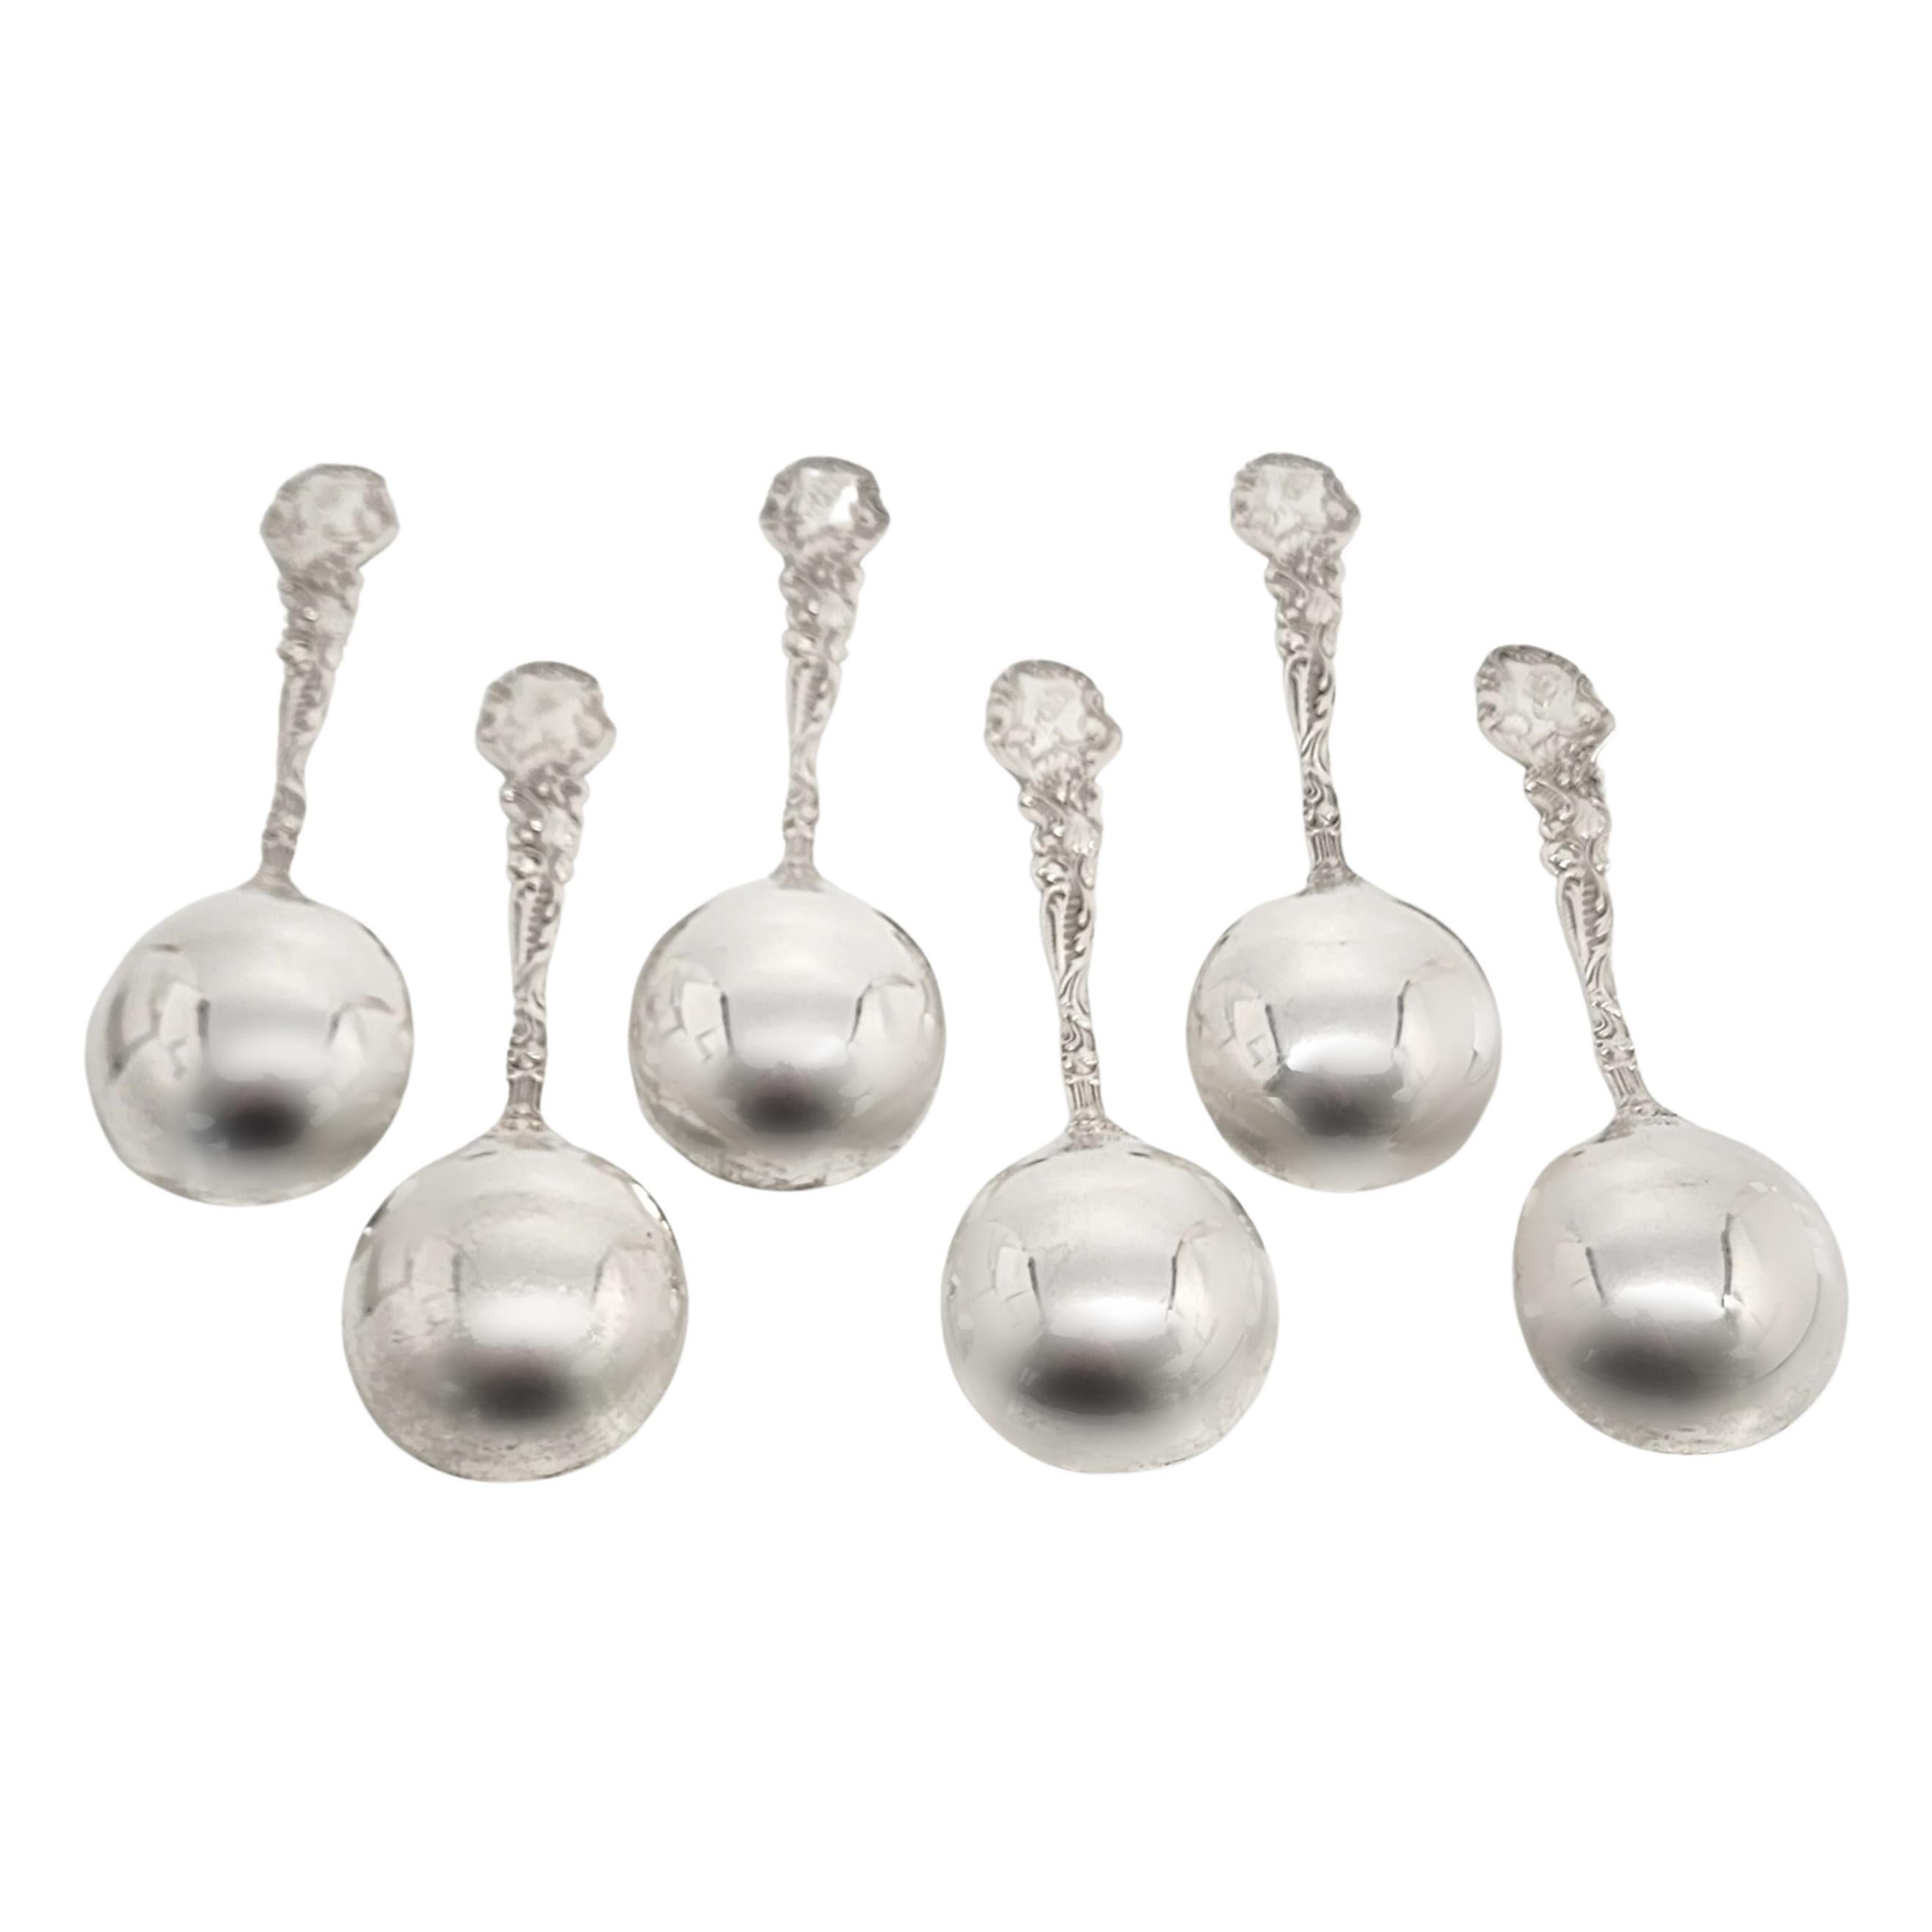 Set of 6 sterling silver round bowl soup bouillon spoons by Gorham in the Versailles pattern with a monogram.

Monogram appears to be ALB, on the back of the handle.

Gorham's Versailles is a multi motif pattern designed by Antoine Heller in 1885.